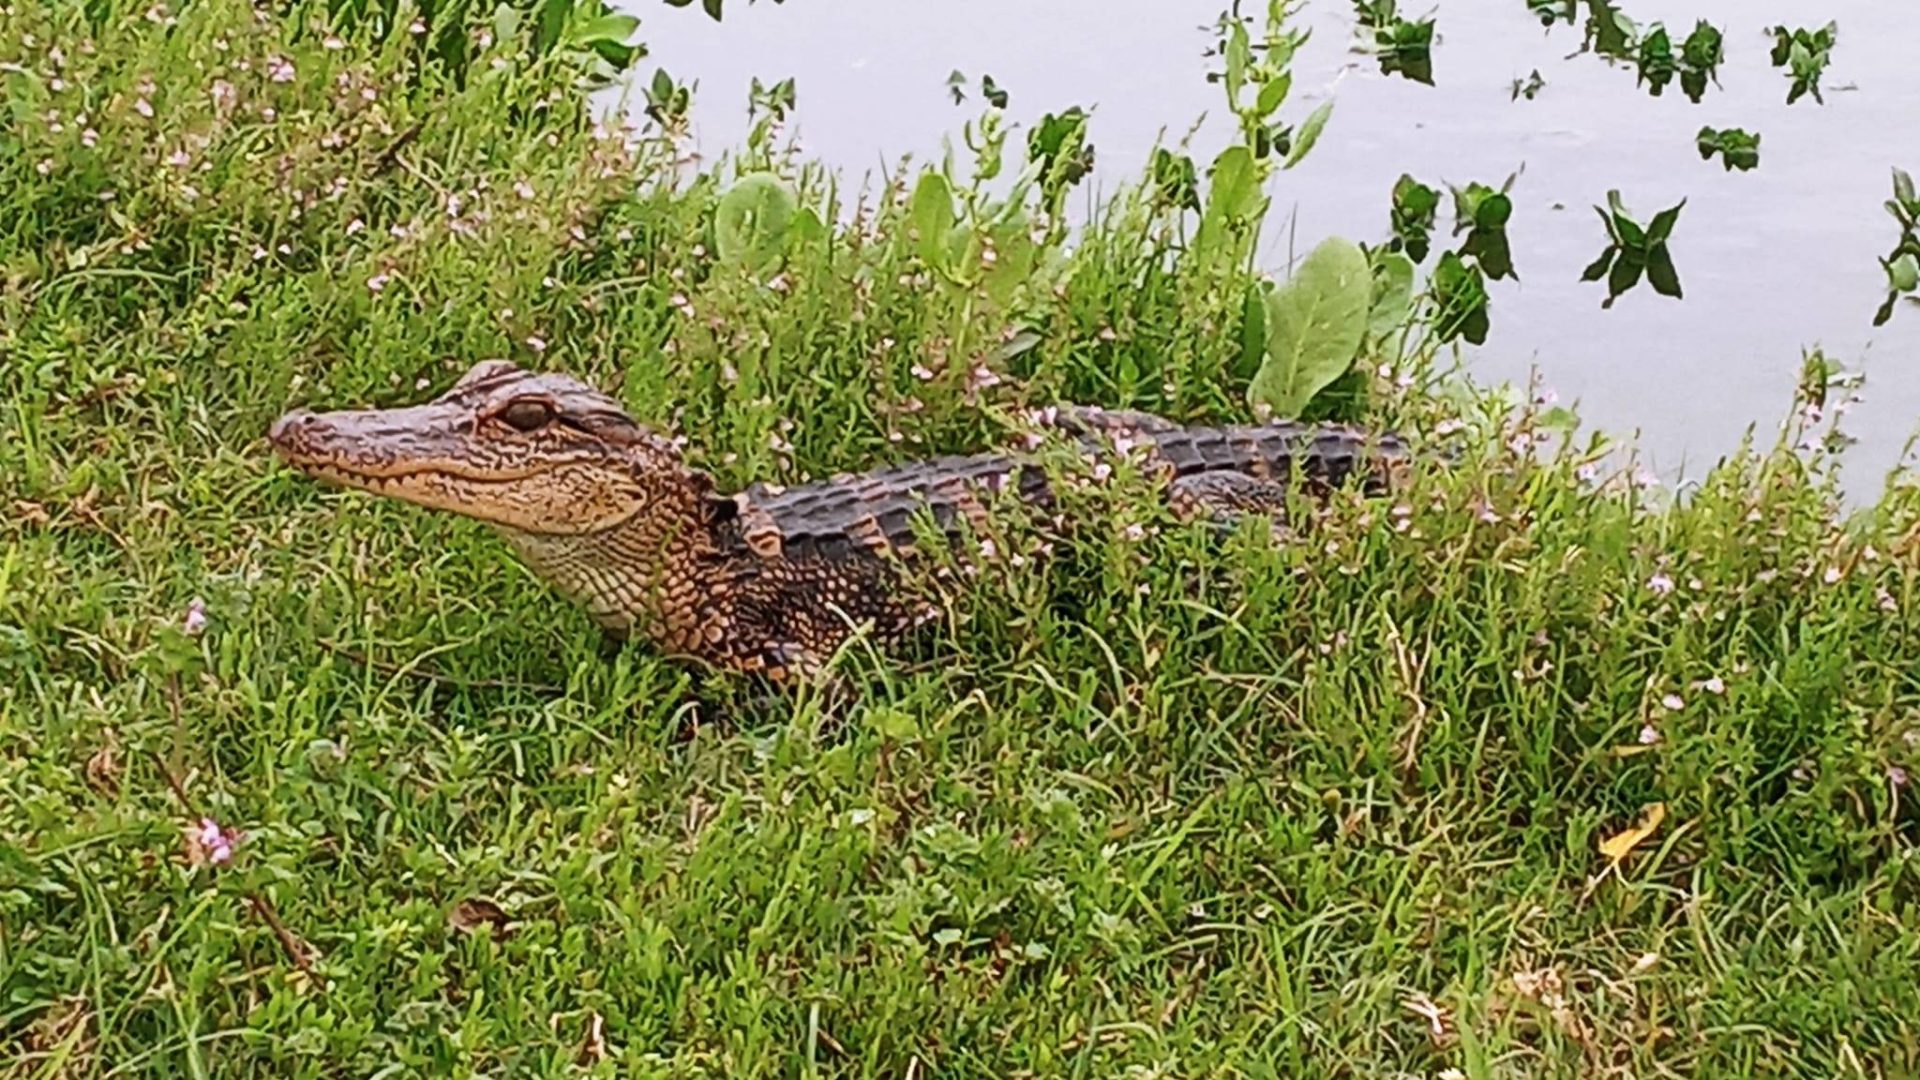 An animal encounter with a young alligator laying on the grass bank of a pond.